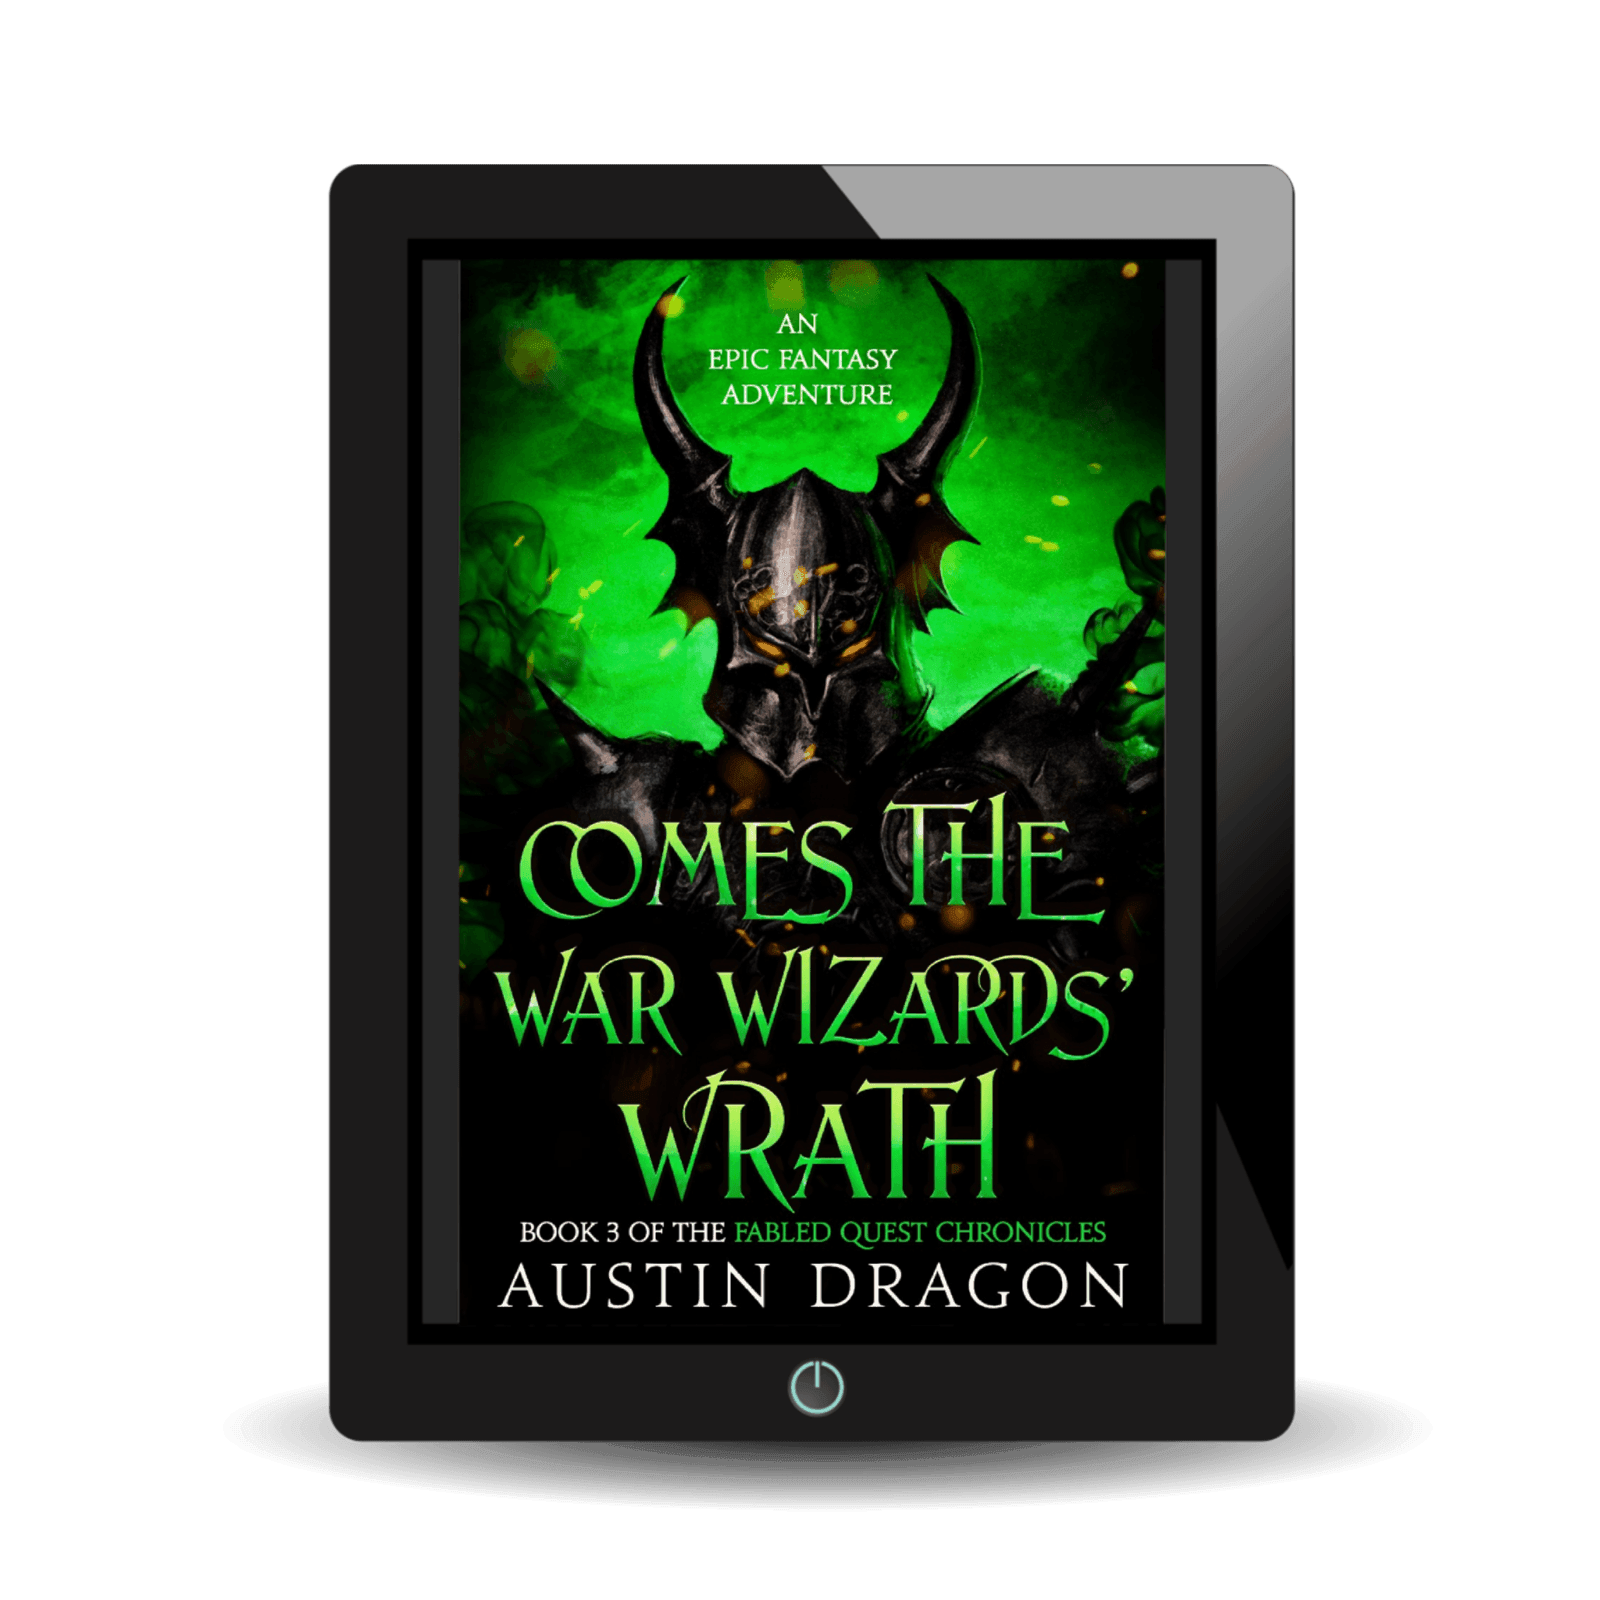 Comes the War Wizards' Wrath (Fabled Quest Chronicles, Book 3) Ebook